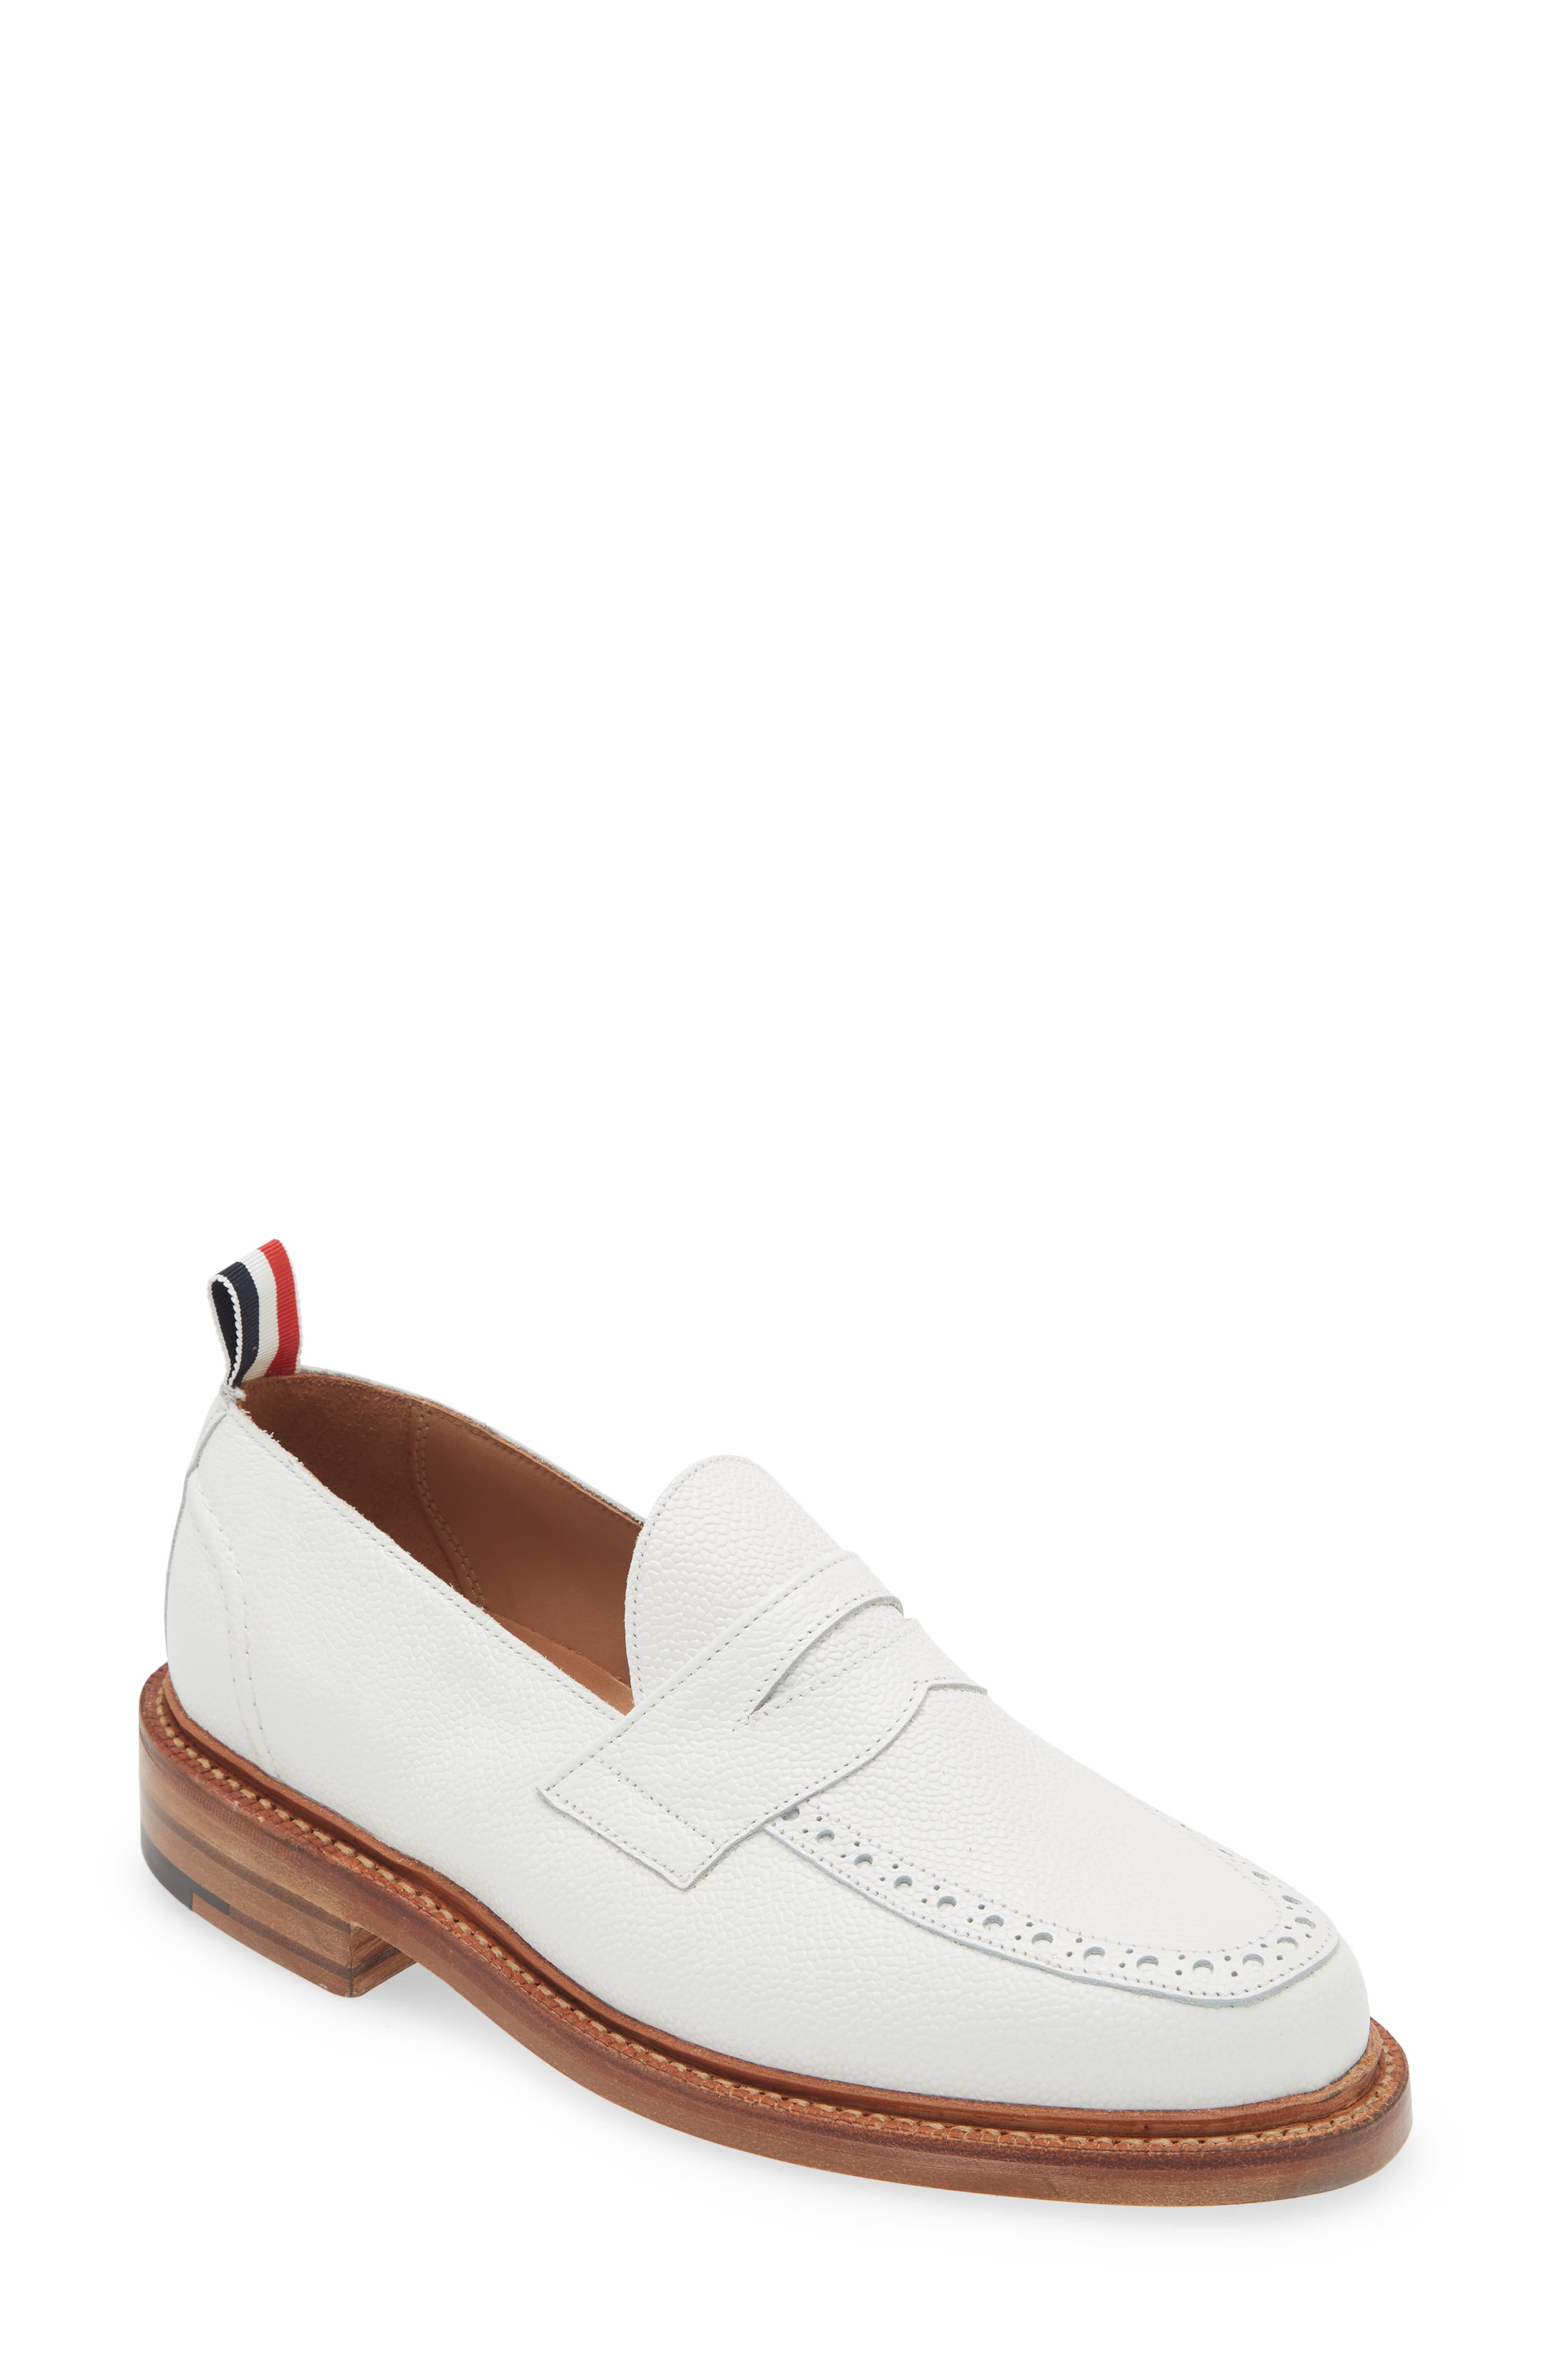 Thom Browne Varsity suede penny loafers